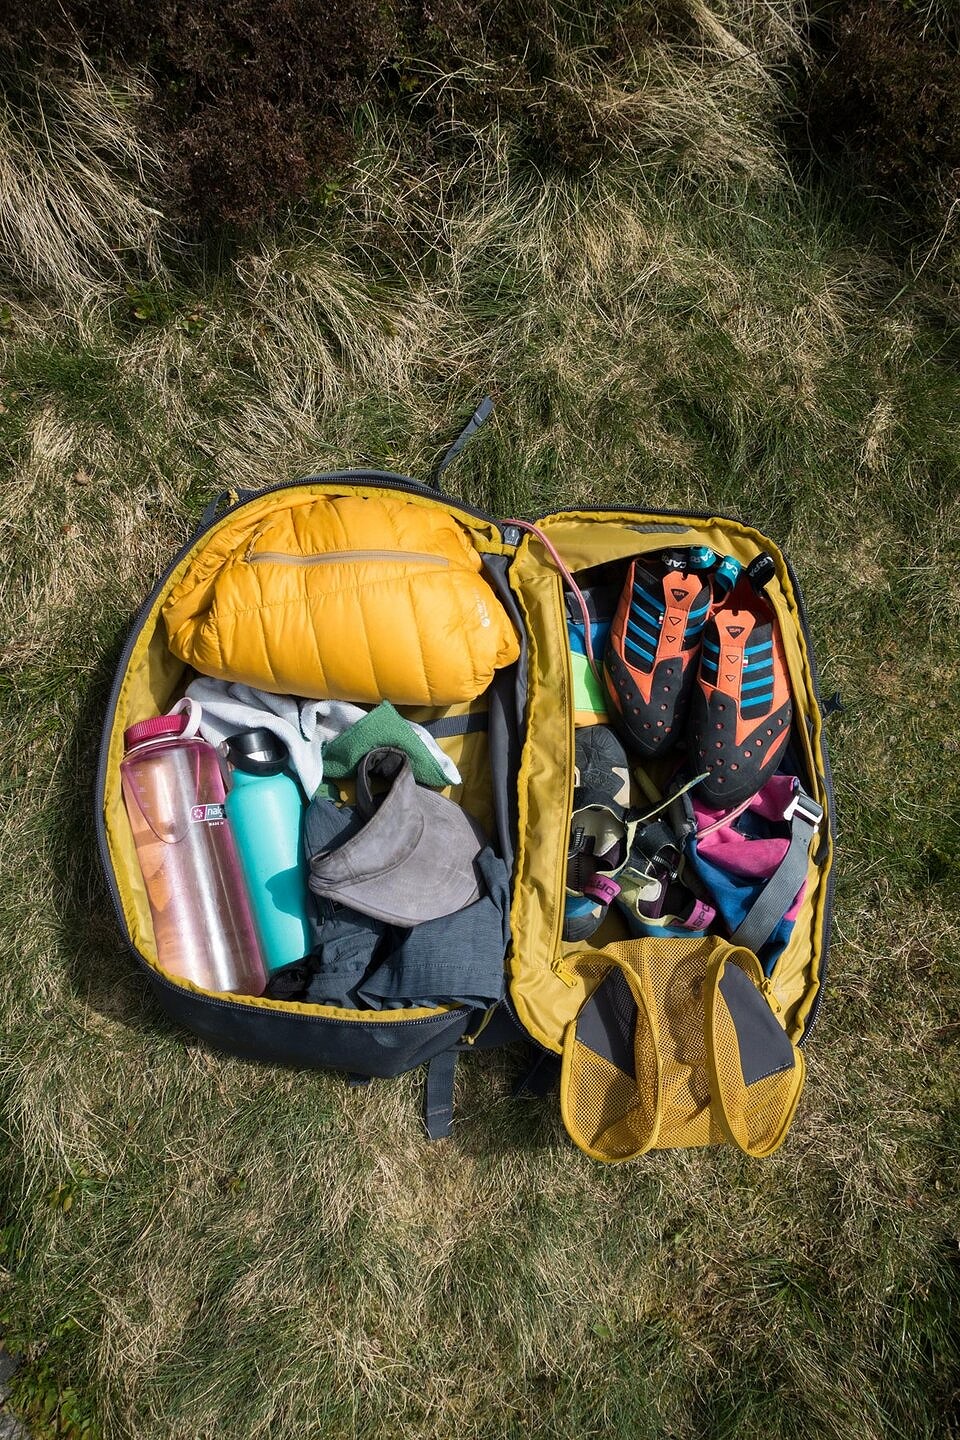 The Outcast 44 in 'boulder mode'  © UKC Gear